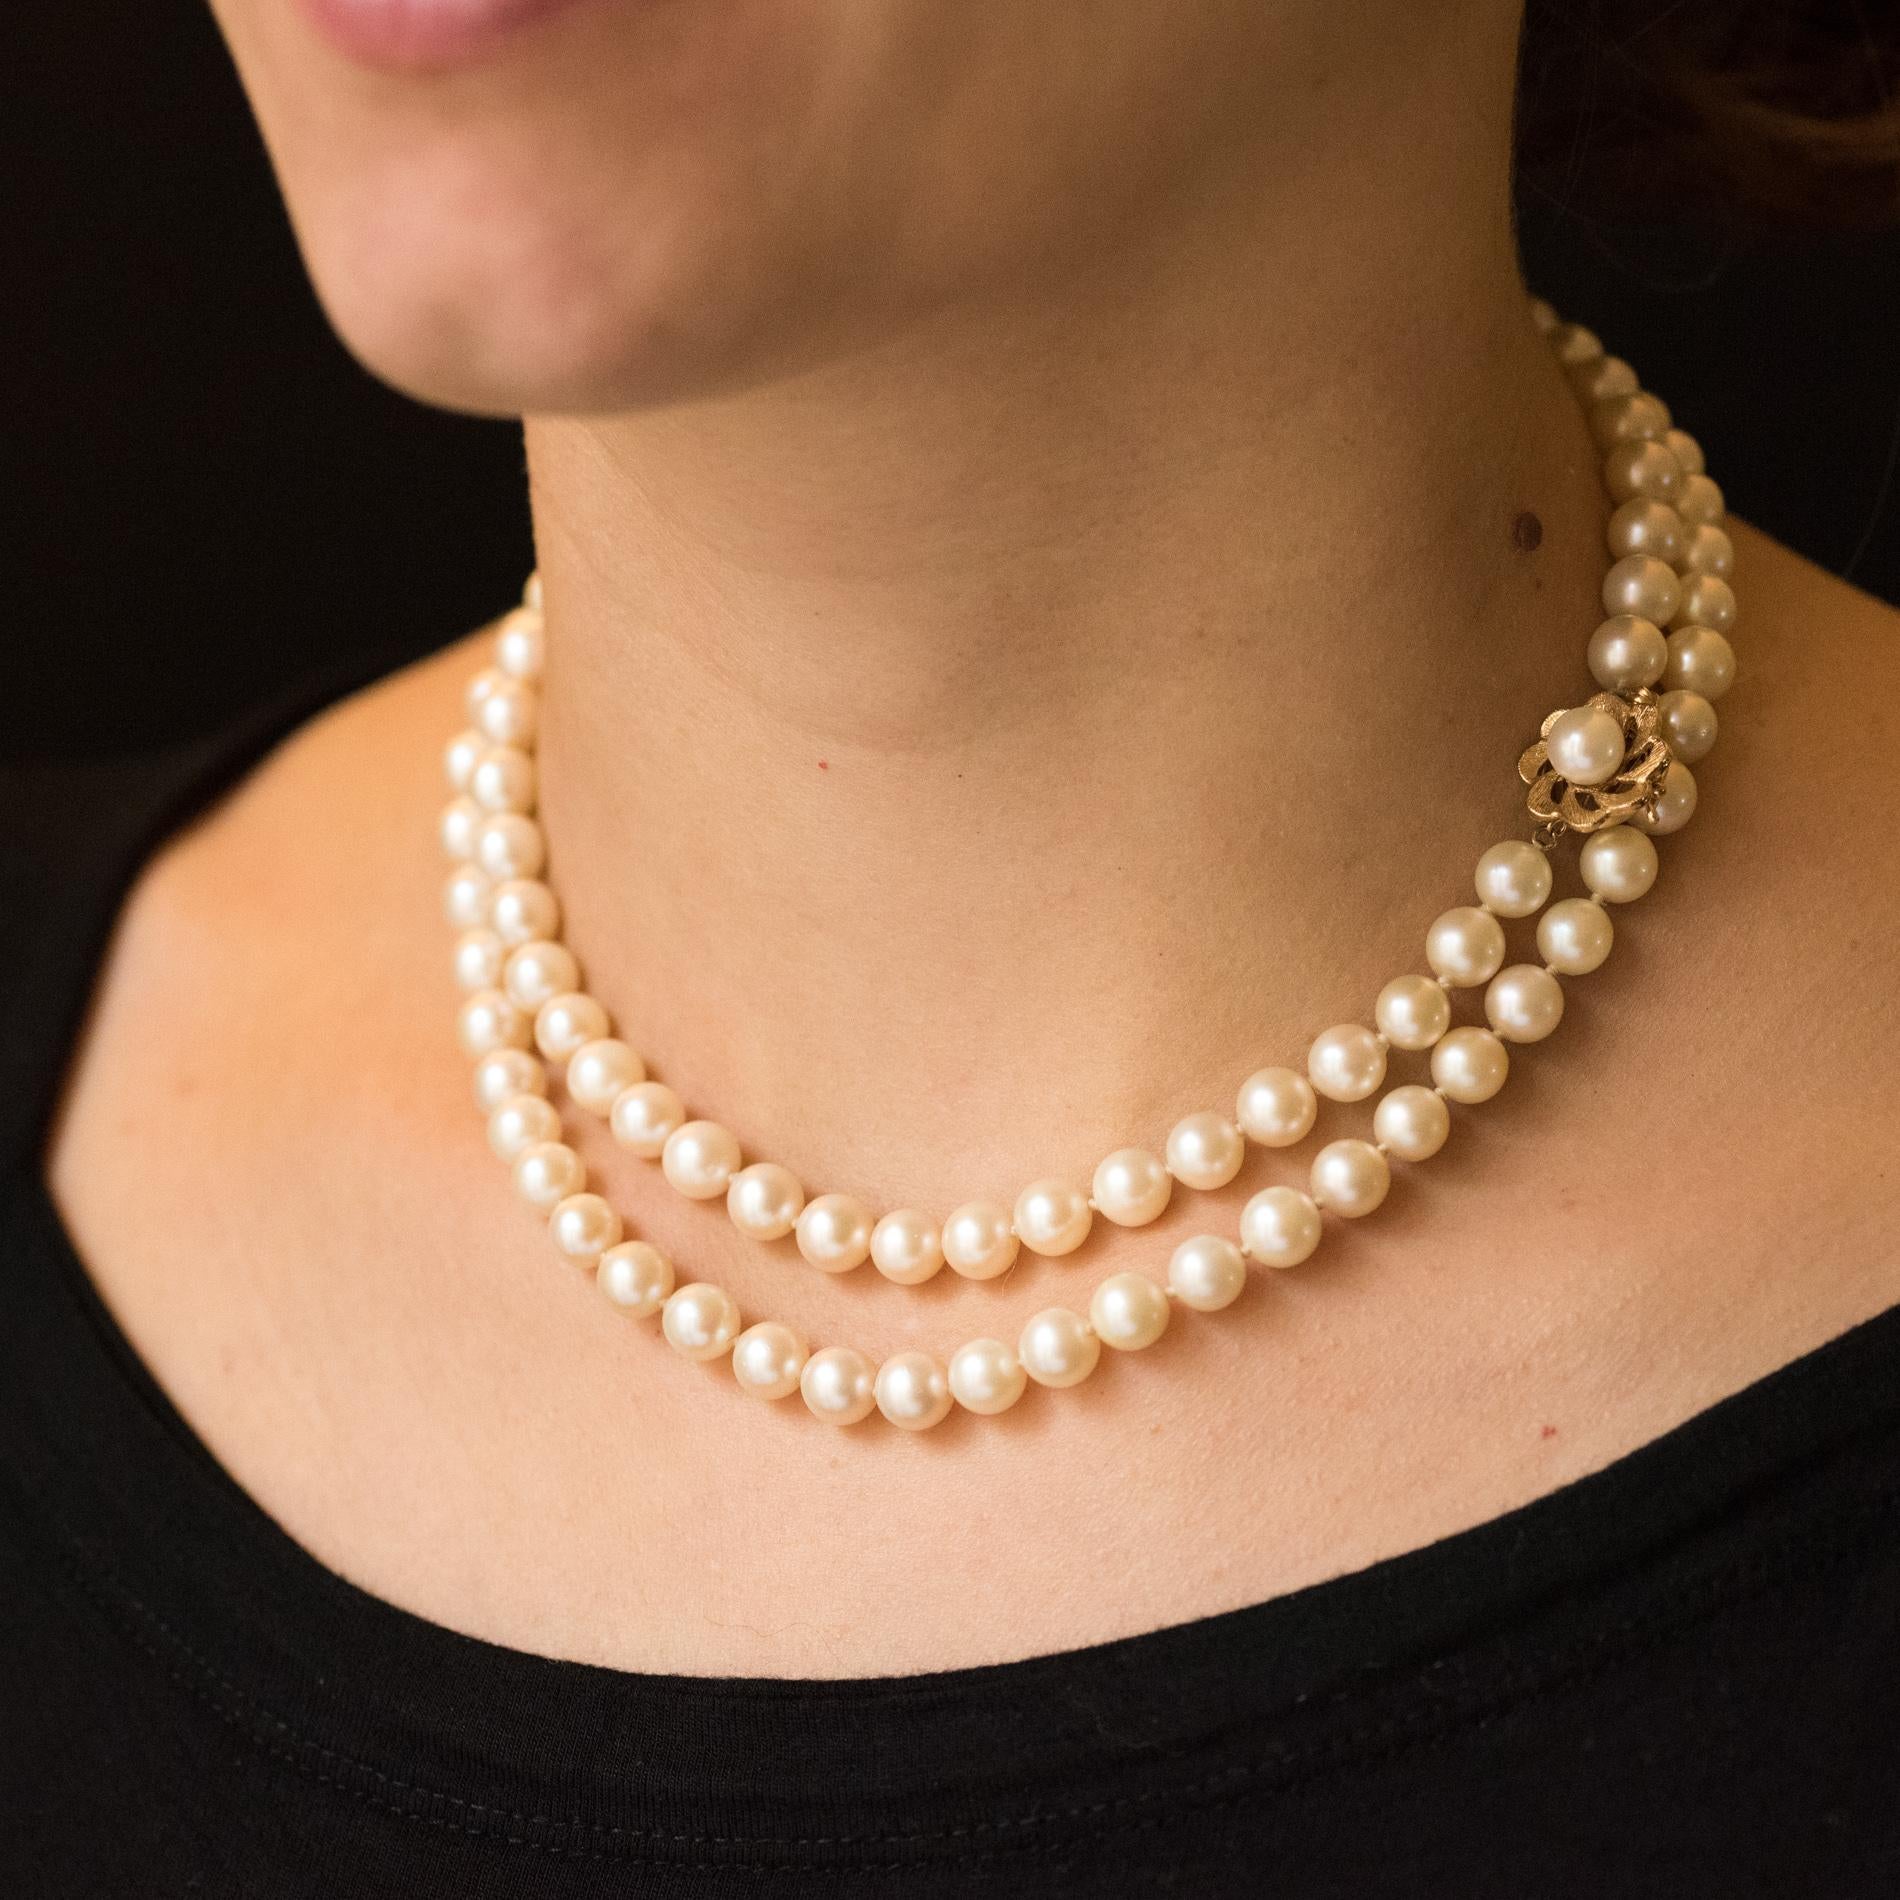 Long choker necklace made of cultured pearls of white shaded orient, the ratchet clasp with 8 of security is in 14 karats yellow gold and represents a perforated flower whose heart is a cultured pearl.
Diameter of the pearls: 7 / 7.5 mm.
Length: 79